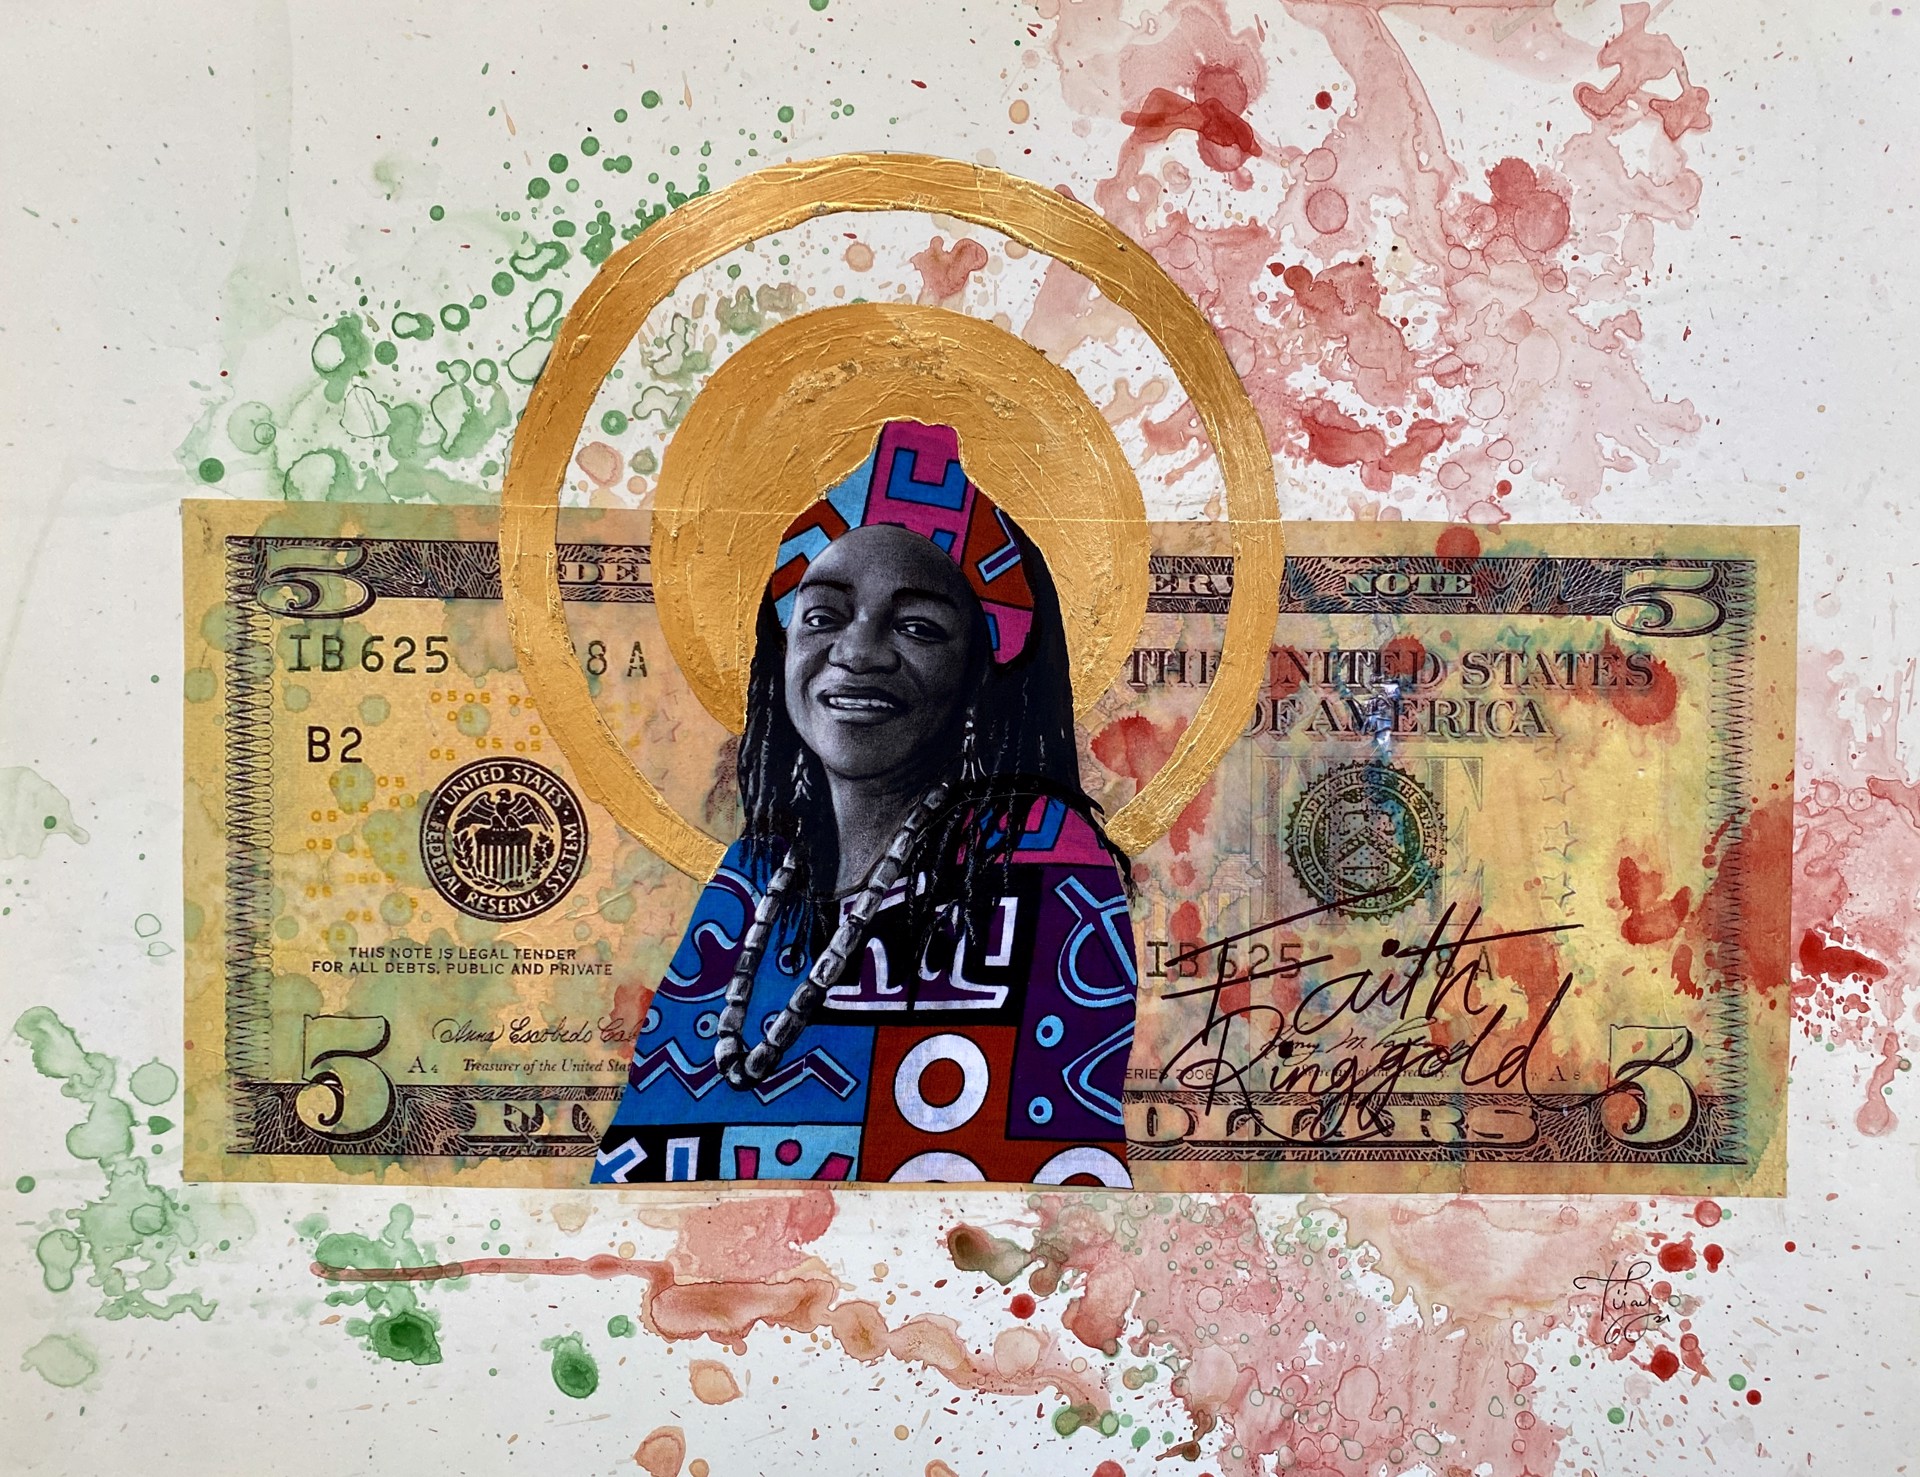 The Pride of Our Village, Faith Ringgold by Tijay Mohammed